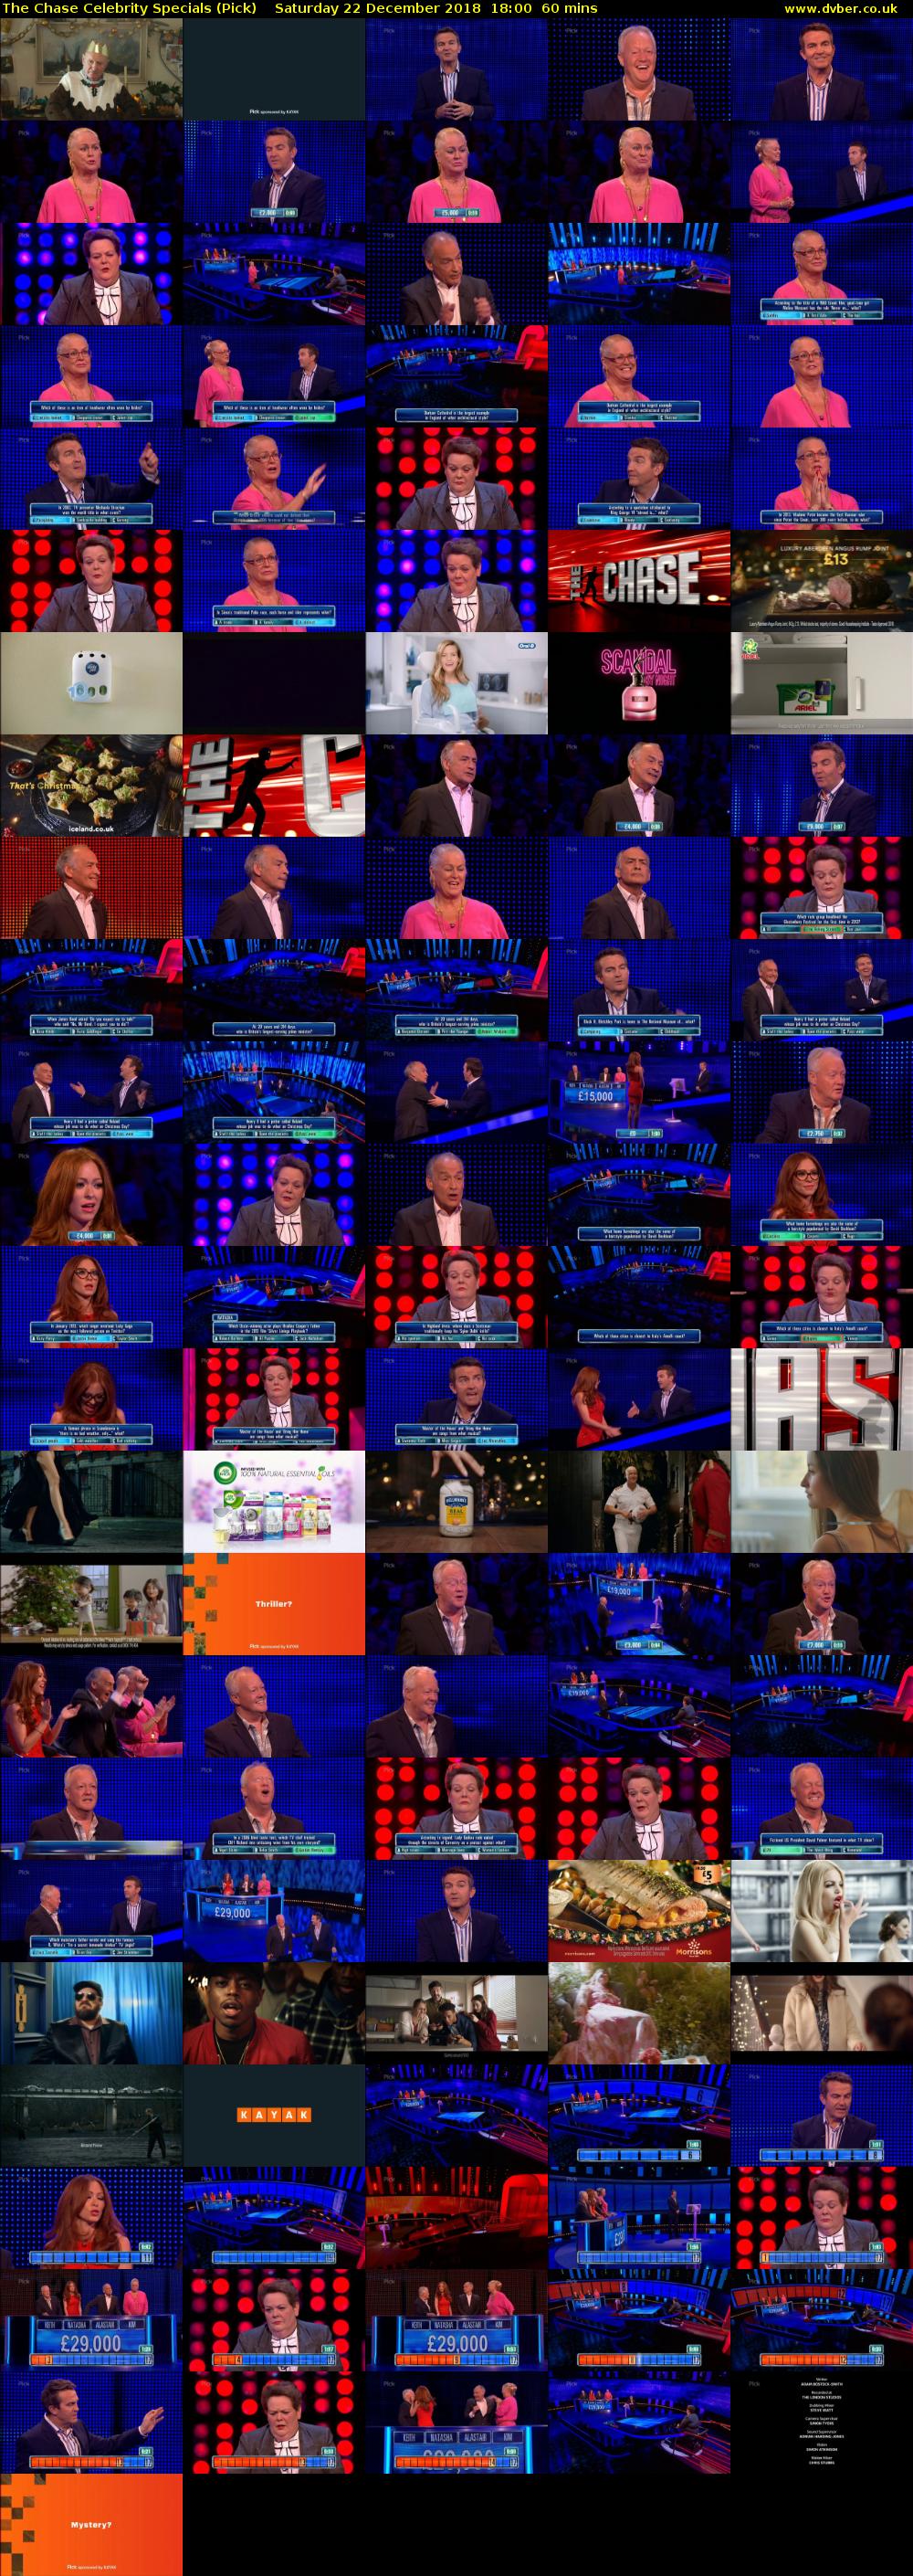 The Chase Celebrity Specials (Pick) Saturday 22 December 2018 18:00 - 19:00